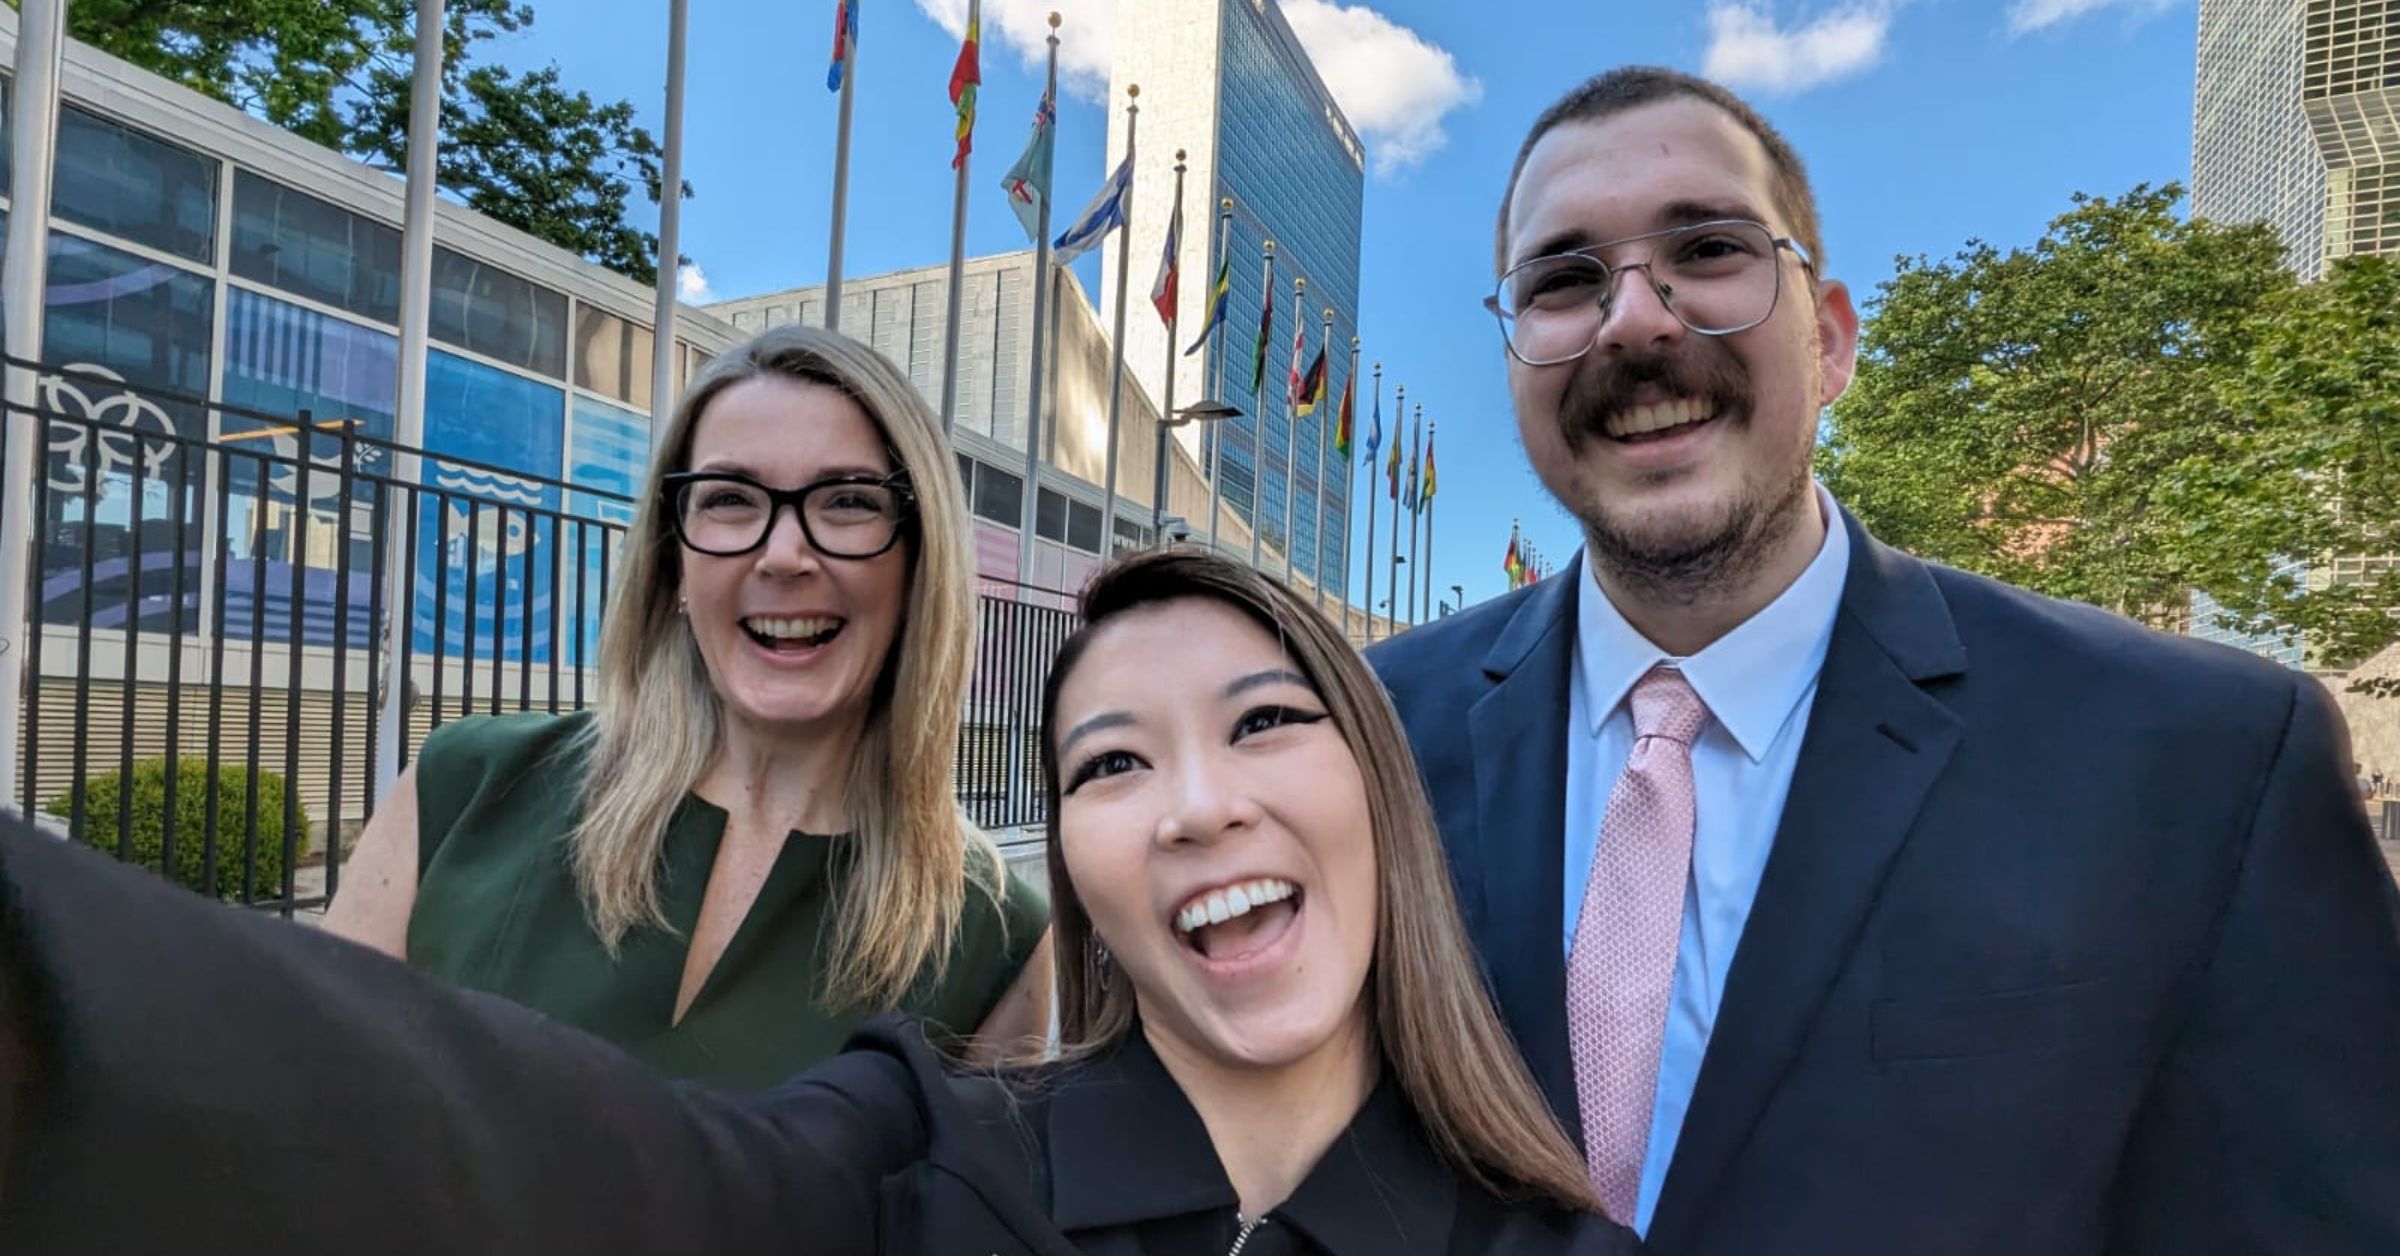 A photo shows three smiling people in front of the United Nations headquarters building. The woman on the left has long blonde hair and is wearing black-framed glasses and a green dress. The person in the middle has long brown-blonde hair and a black jacket. The man on the right has short-cropped brown hair and is wearing a navy suit, a pink tie, and silver-framed glasses.